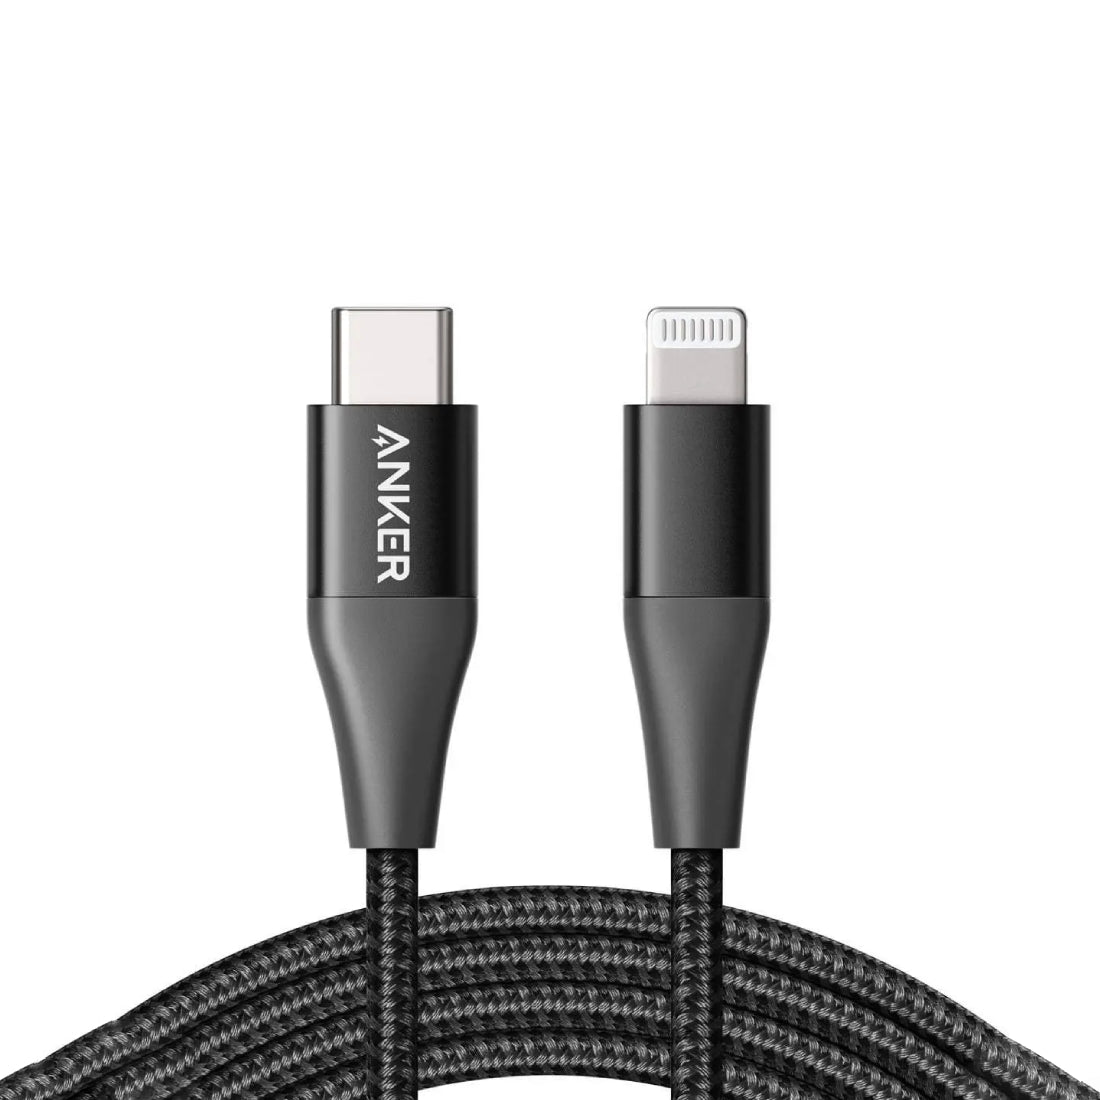 Anker PowerLine+ II USB-C Cable with Lightning Connector 1.8m - Black - كابل - Store 974 | ستور ٩٧٤